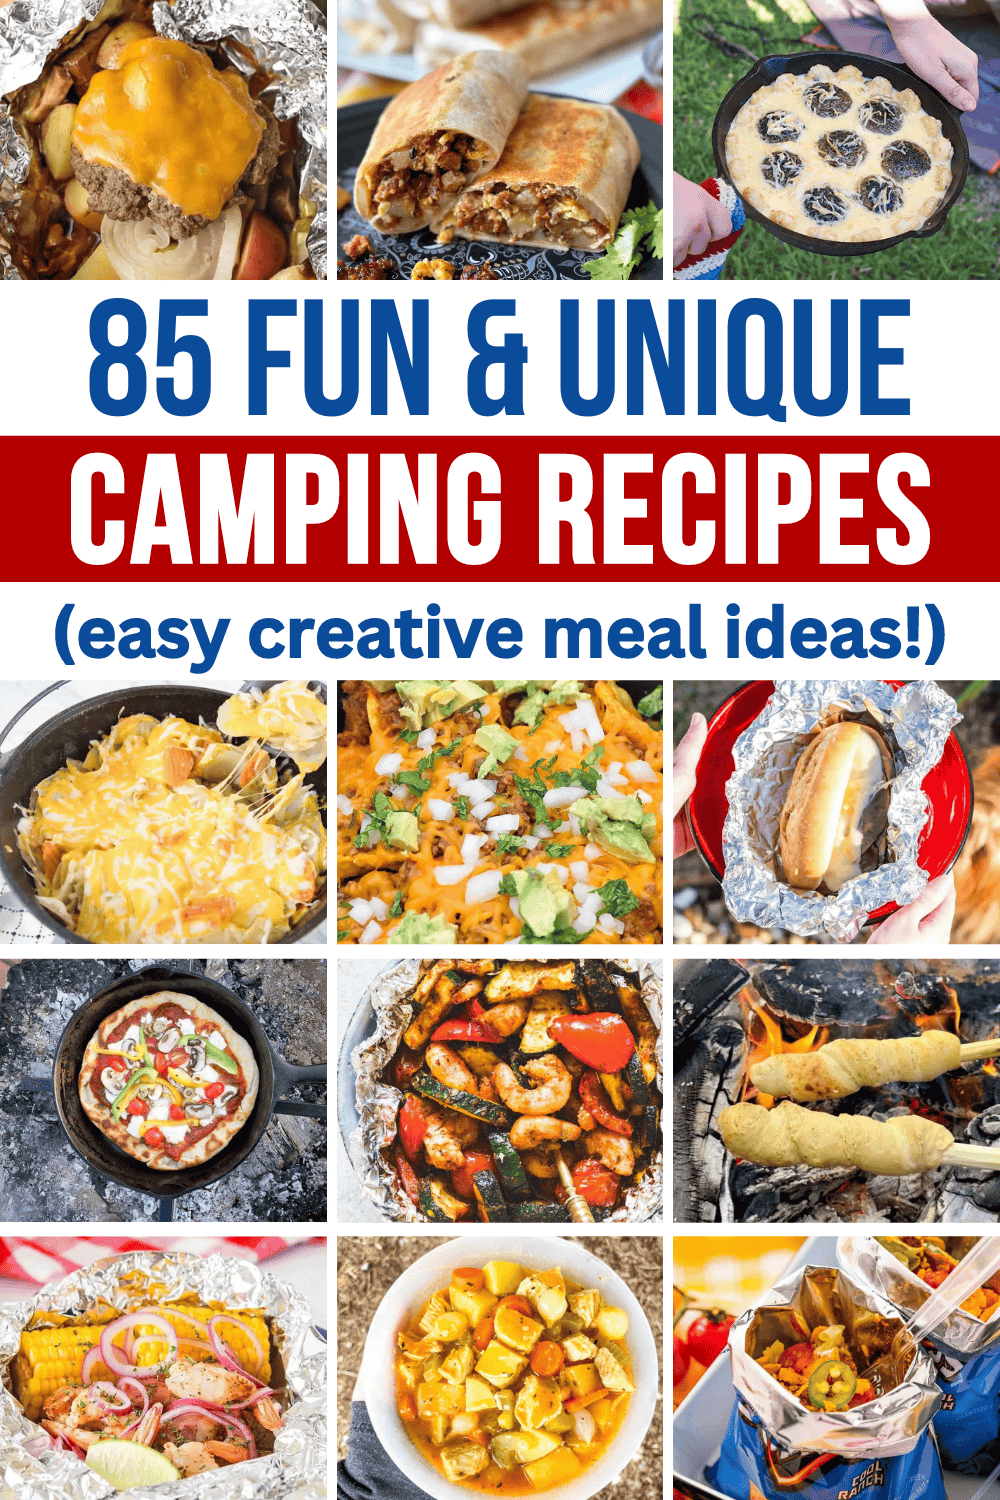 Easy summer camping meals! These fun camping meals easy make ahead recipes, meal ideas for camping easy recipes, camping recipes easy outdoor cooking, easy dutch oven recipes for camping meal ideas, premade food for camping meal ideas, best camping meals for large groups, easy camping meals dinner over fire, food for camping aesthetic, easy food for camping ideas, cast iron camp food ideas, foil packets for camping campfire foods, campfire cooking recipes kids, easy camping dinner ideas families